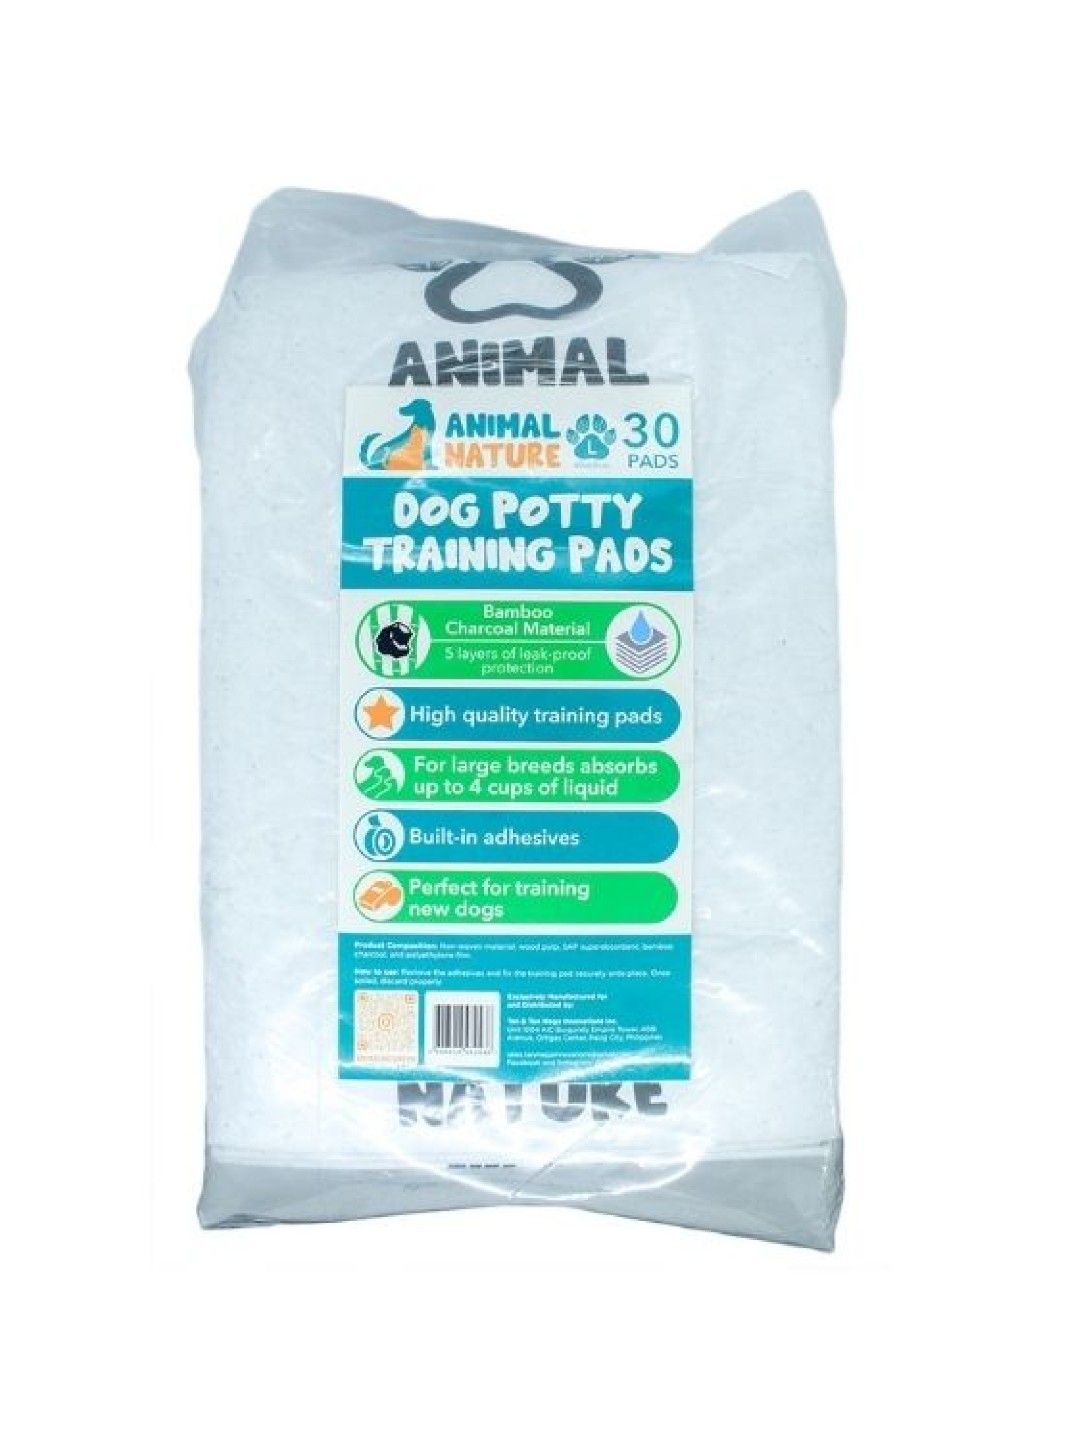 Animal Nature Training Pads Pee Pads and Underpads for Dogs with Bamboo and Charcoal Fiber